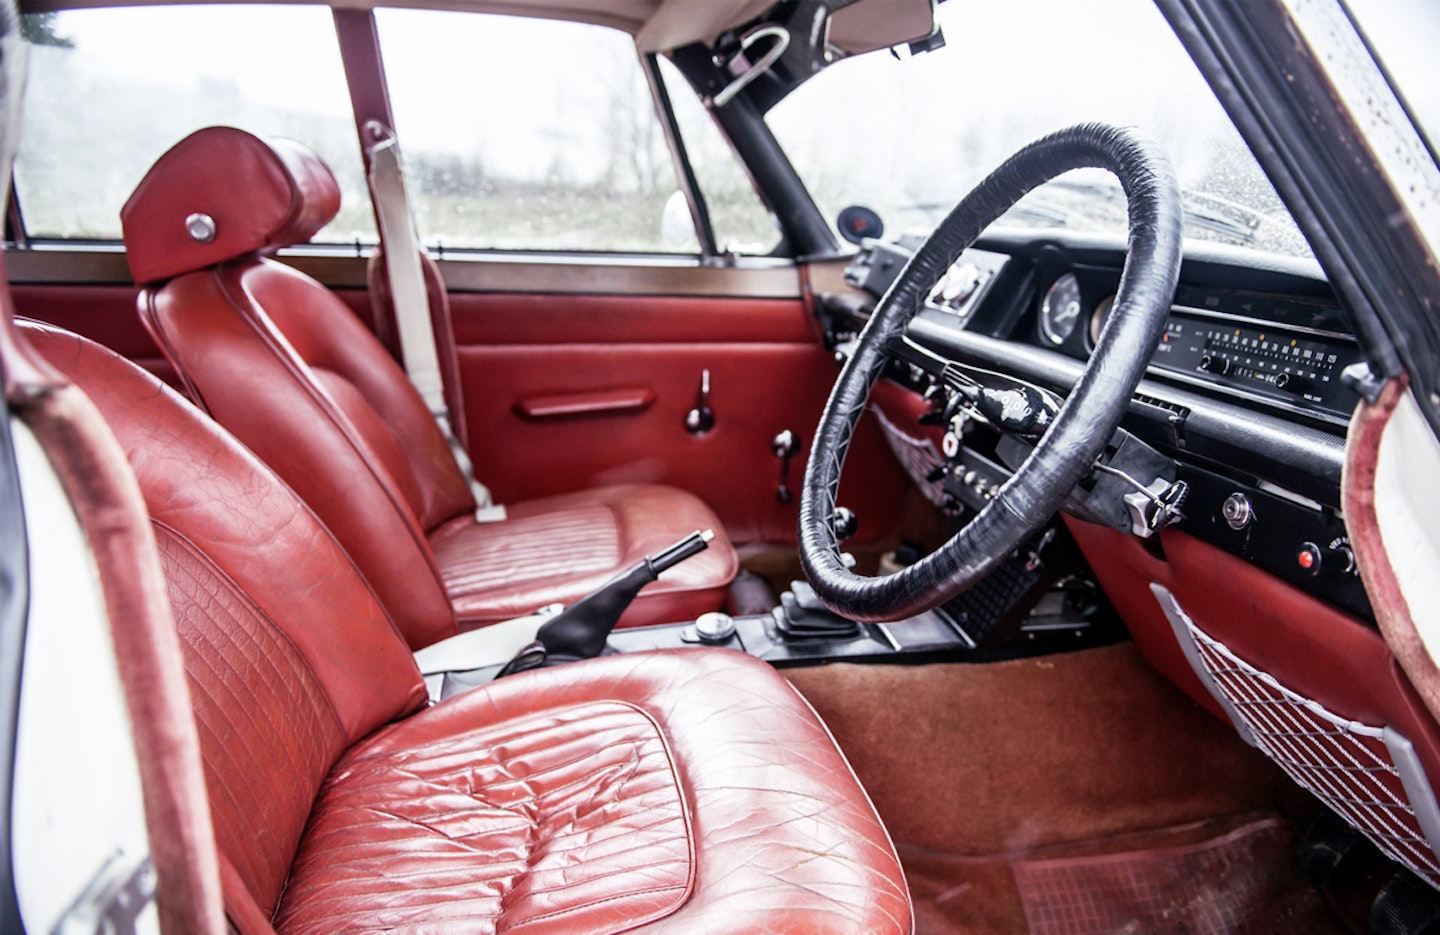 Despite its rally car intent, the interior is as plush as any contemporary road car